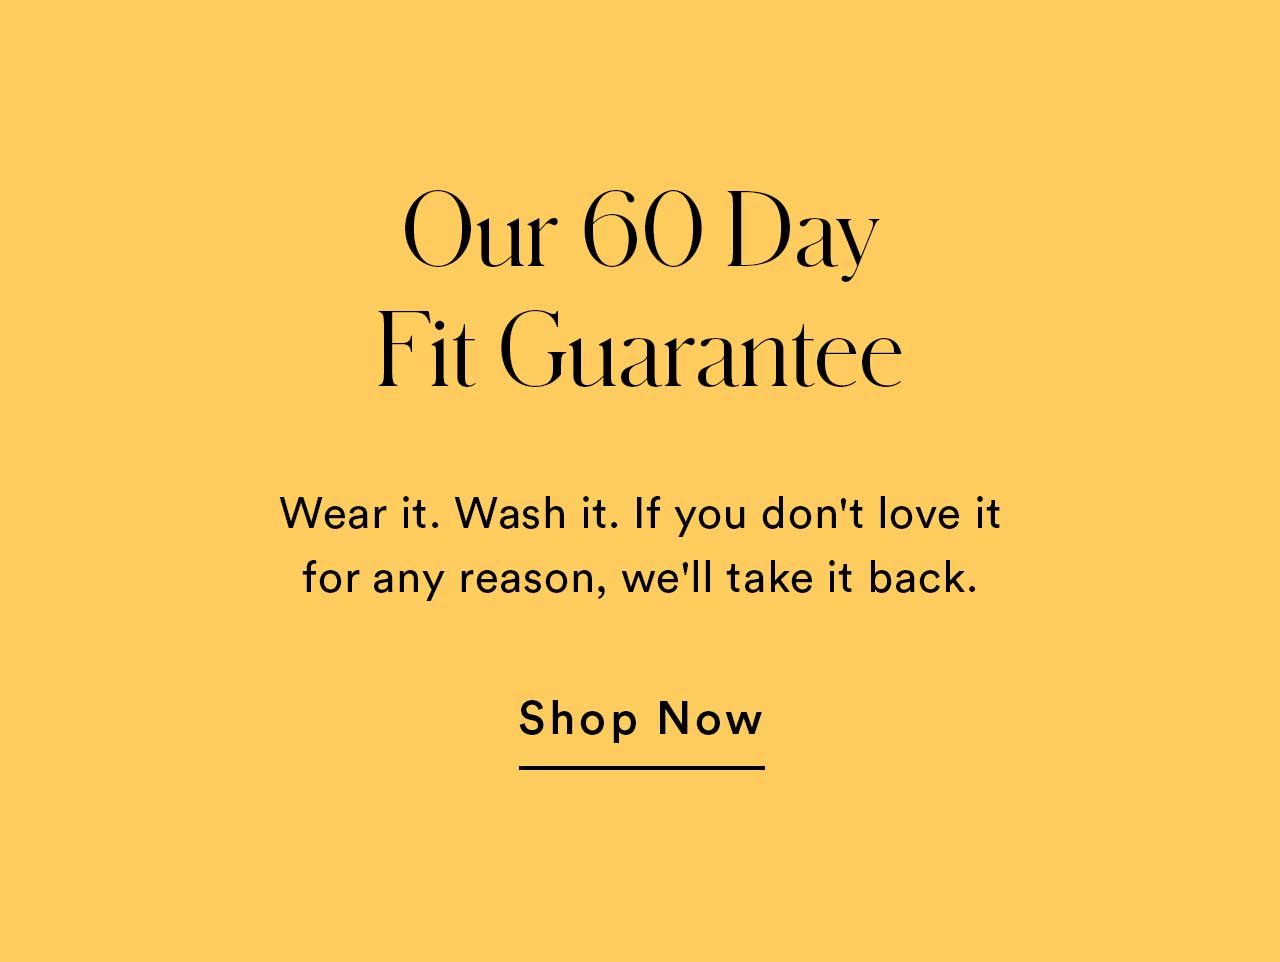 Our 60 Day Fit Guarantee | Wear it. Wash it. If you don't love it for any reason, we'll take it back. | Shop Now